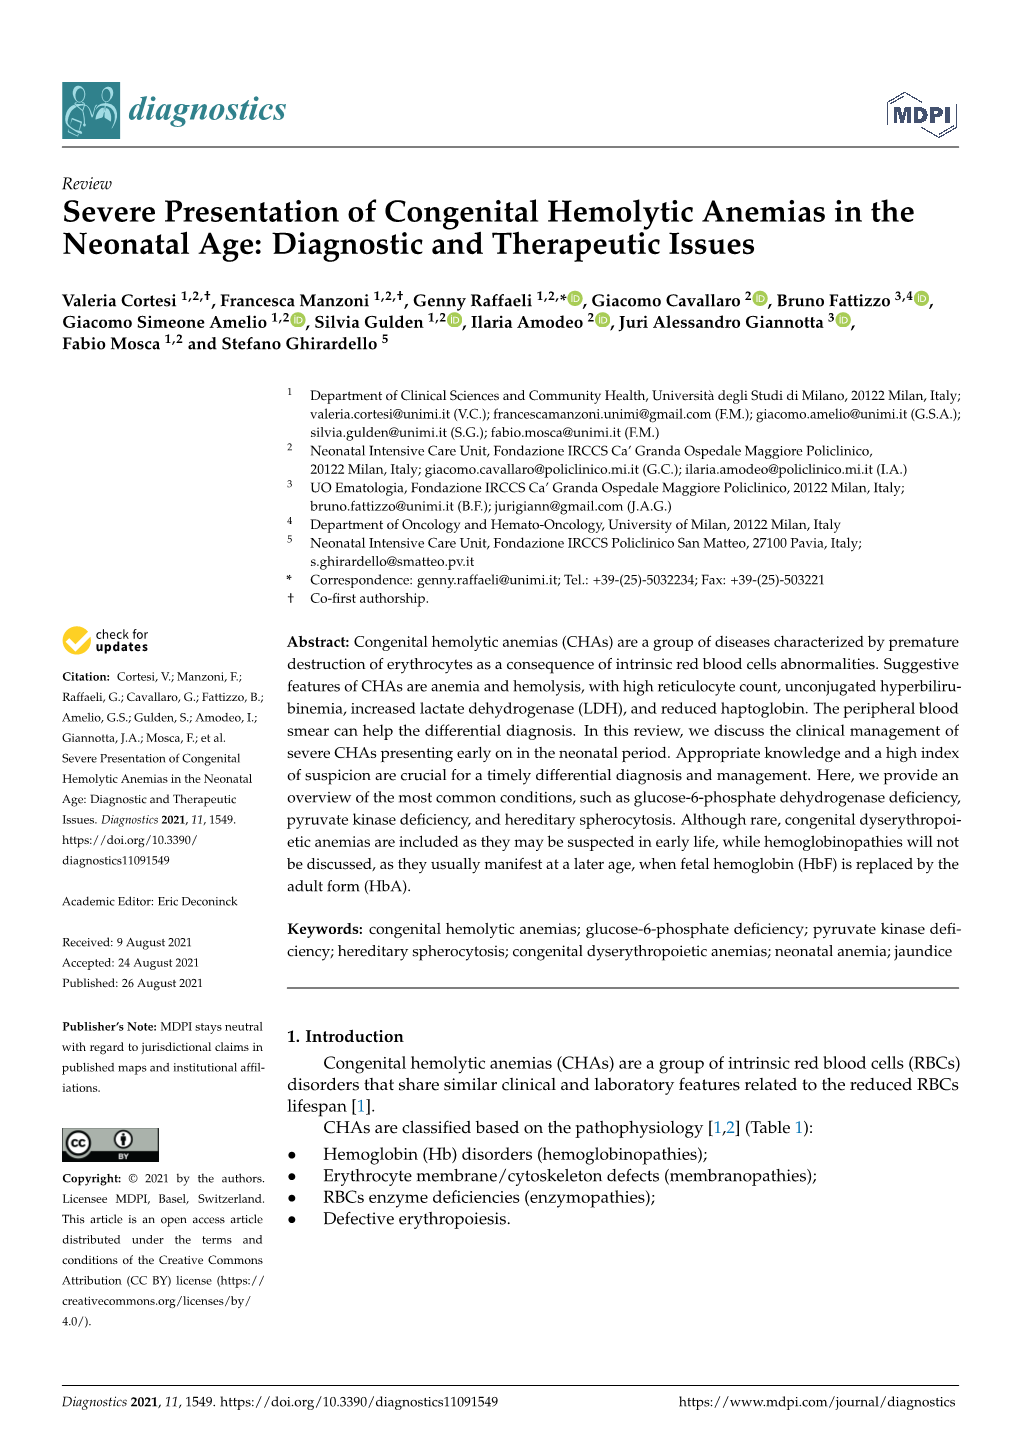 Severe Presentation of Congenital Hemolytic Anemias in the Neonatal Age: Diagnostic and Therapeutic Issues